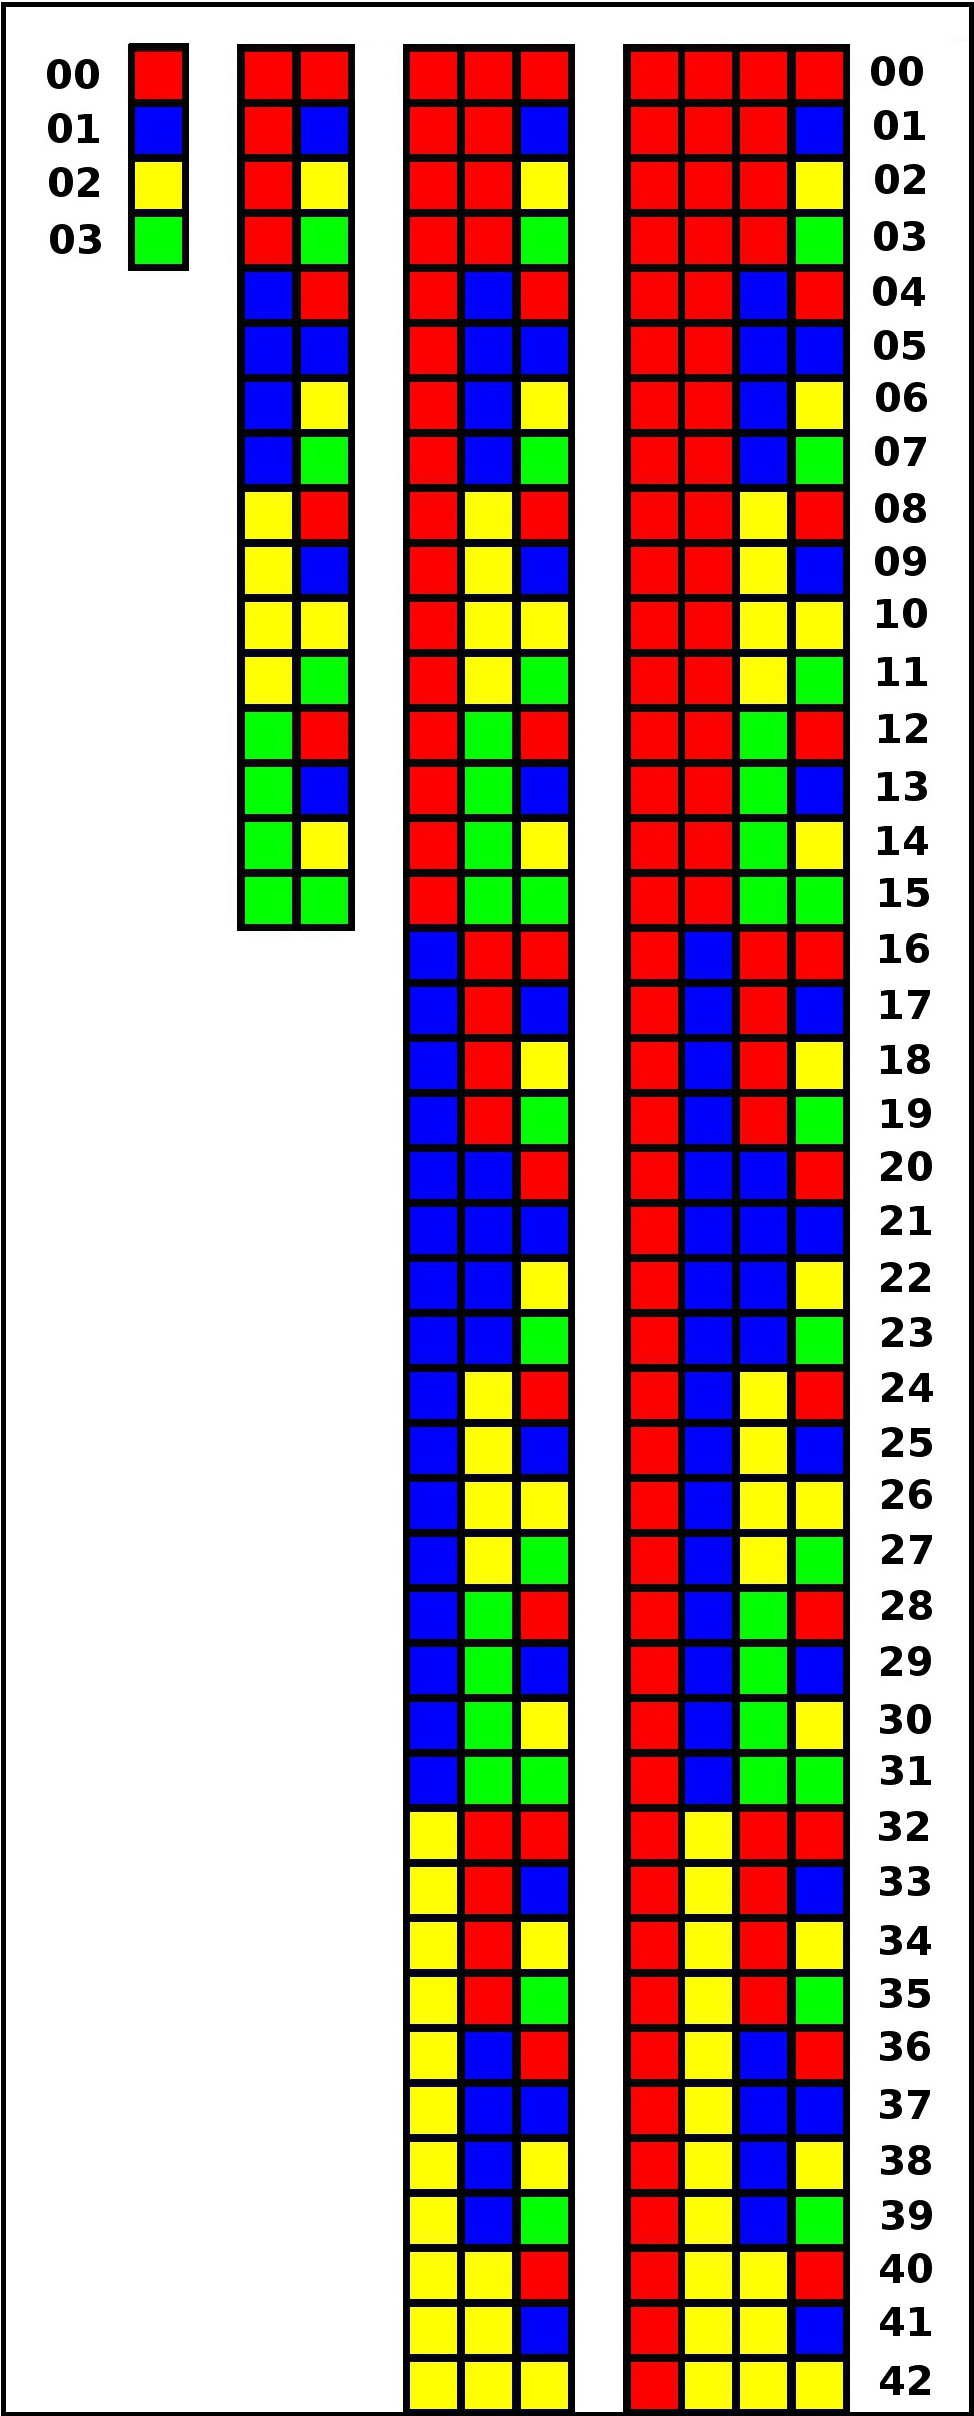 Visual Image of Base 4 Numbers